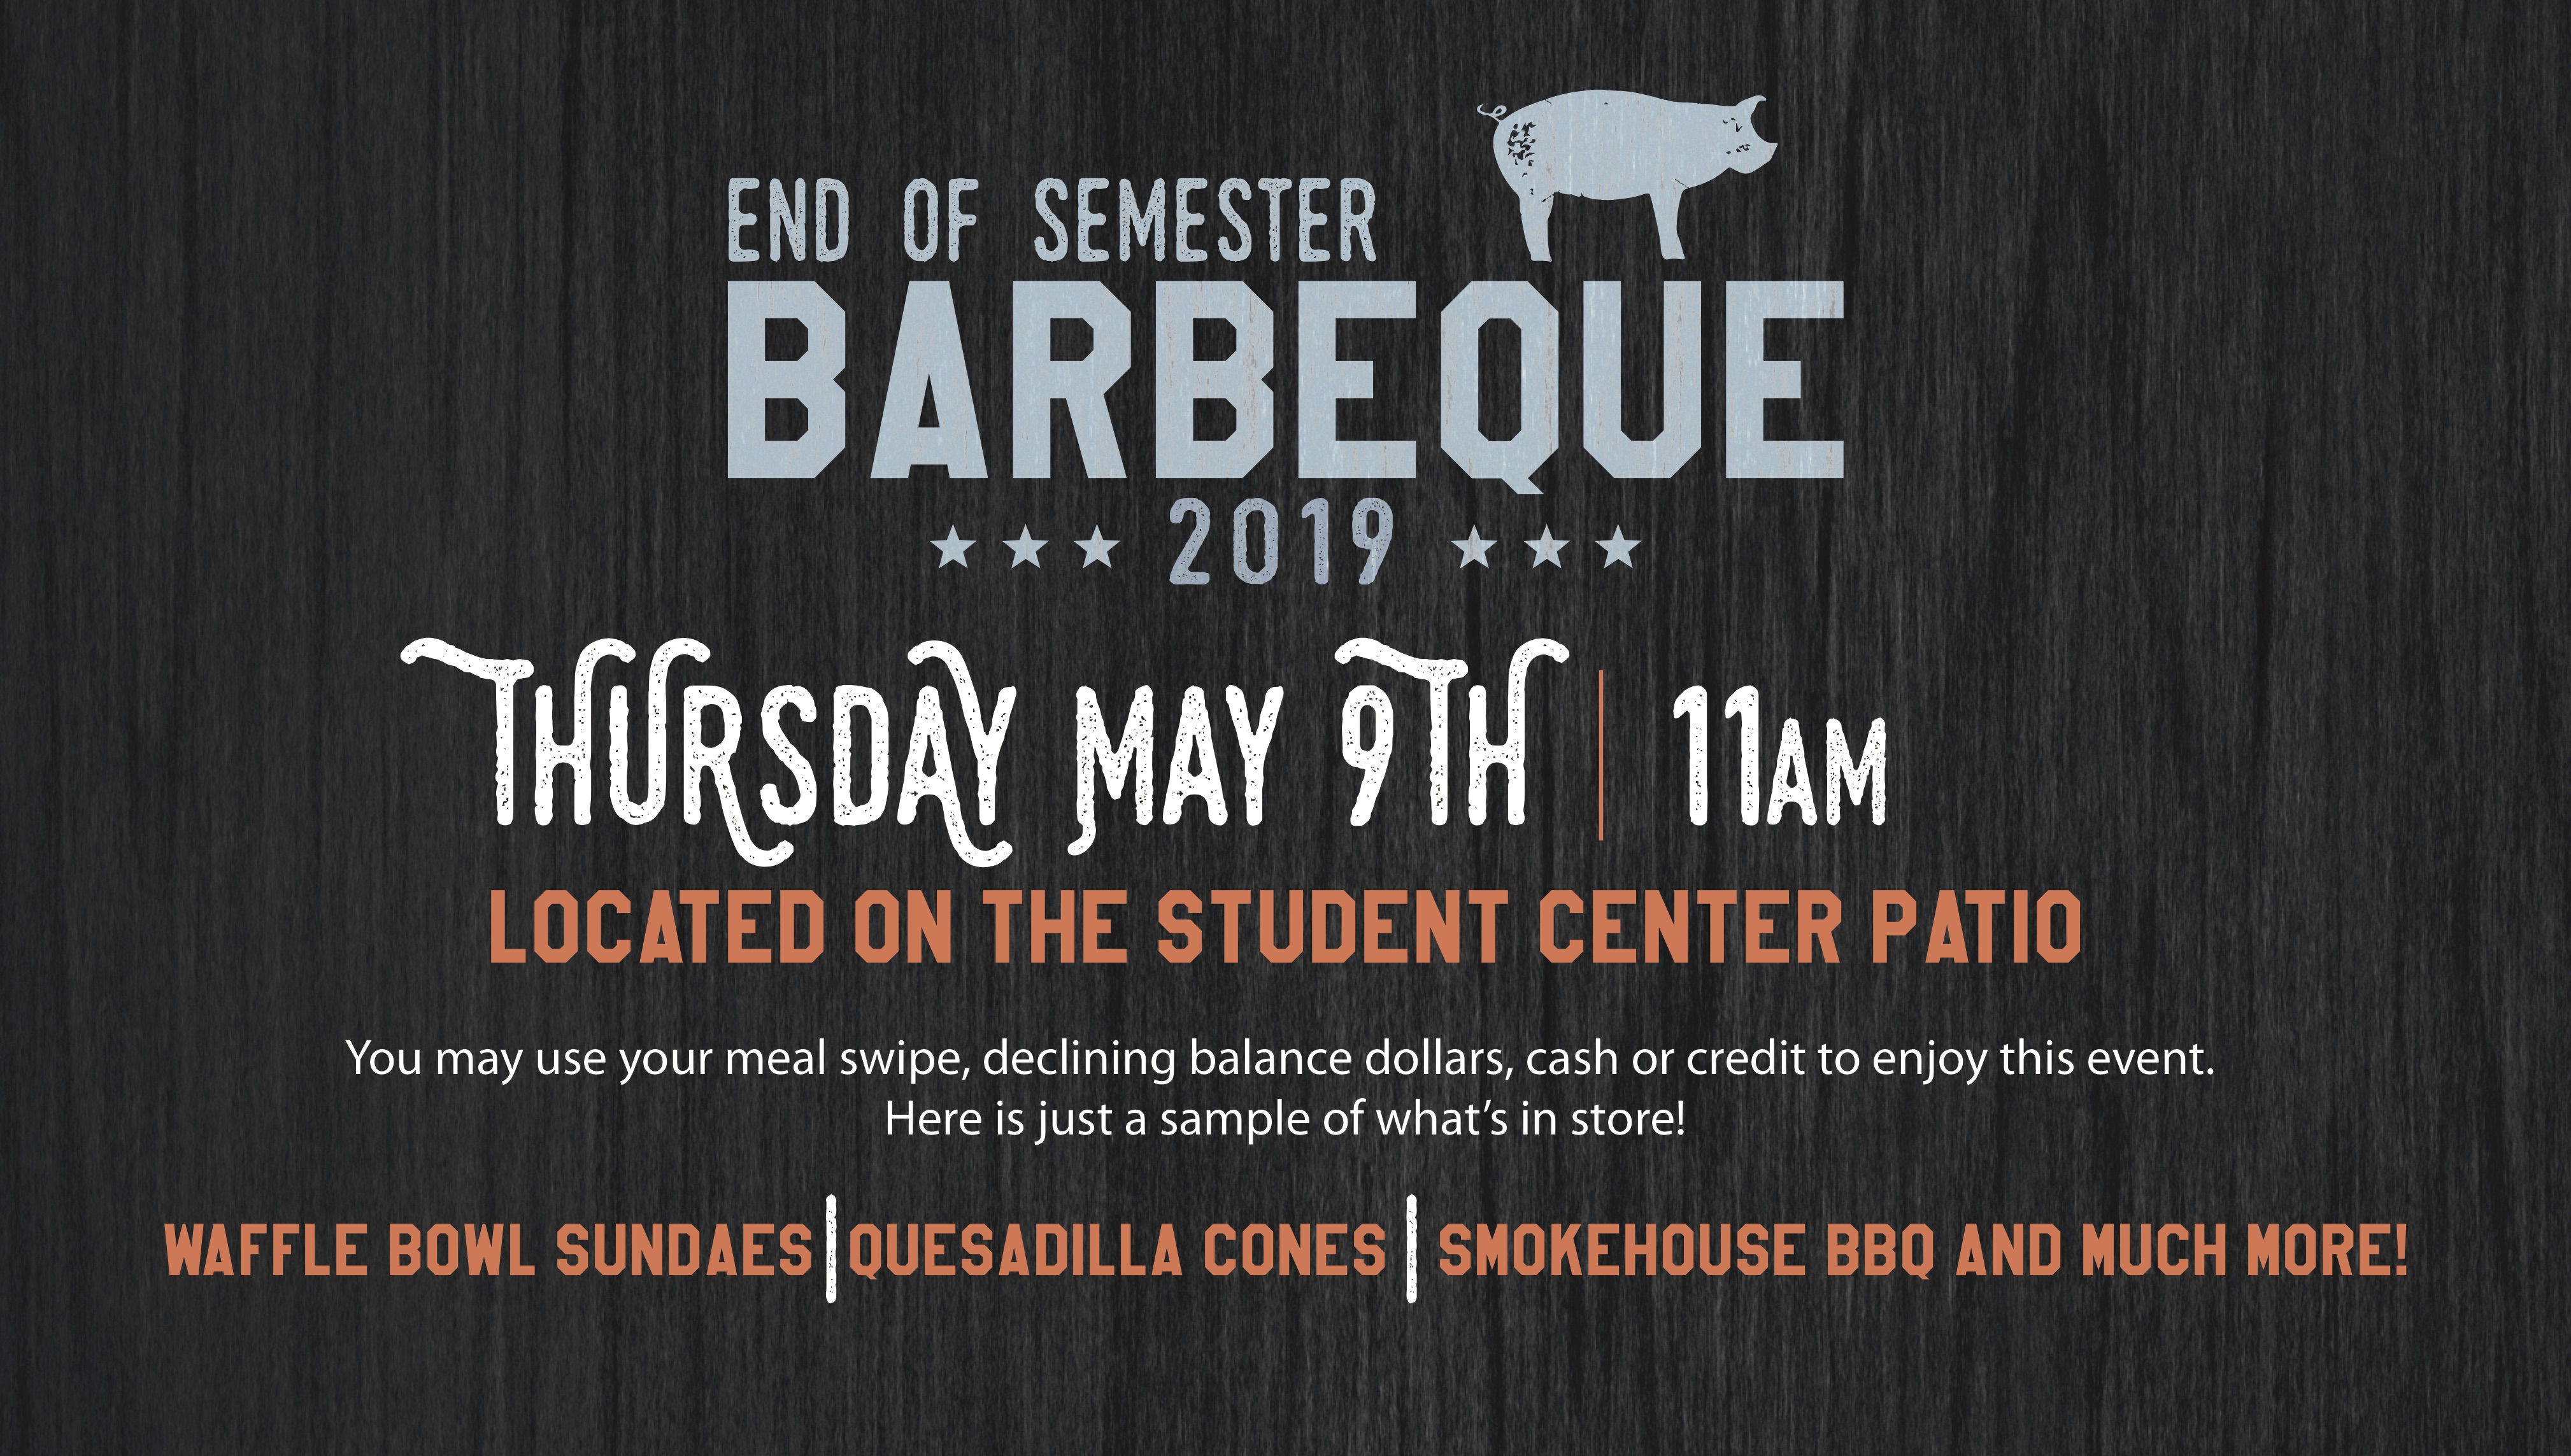 Join American Dining Creations from 11 a.m. to 3 p.m. Thursday, May 9, for the end-of-semester Customer Appreciation Barbecue and Street Fair!